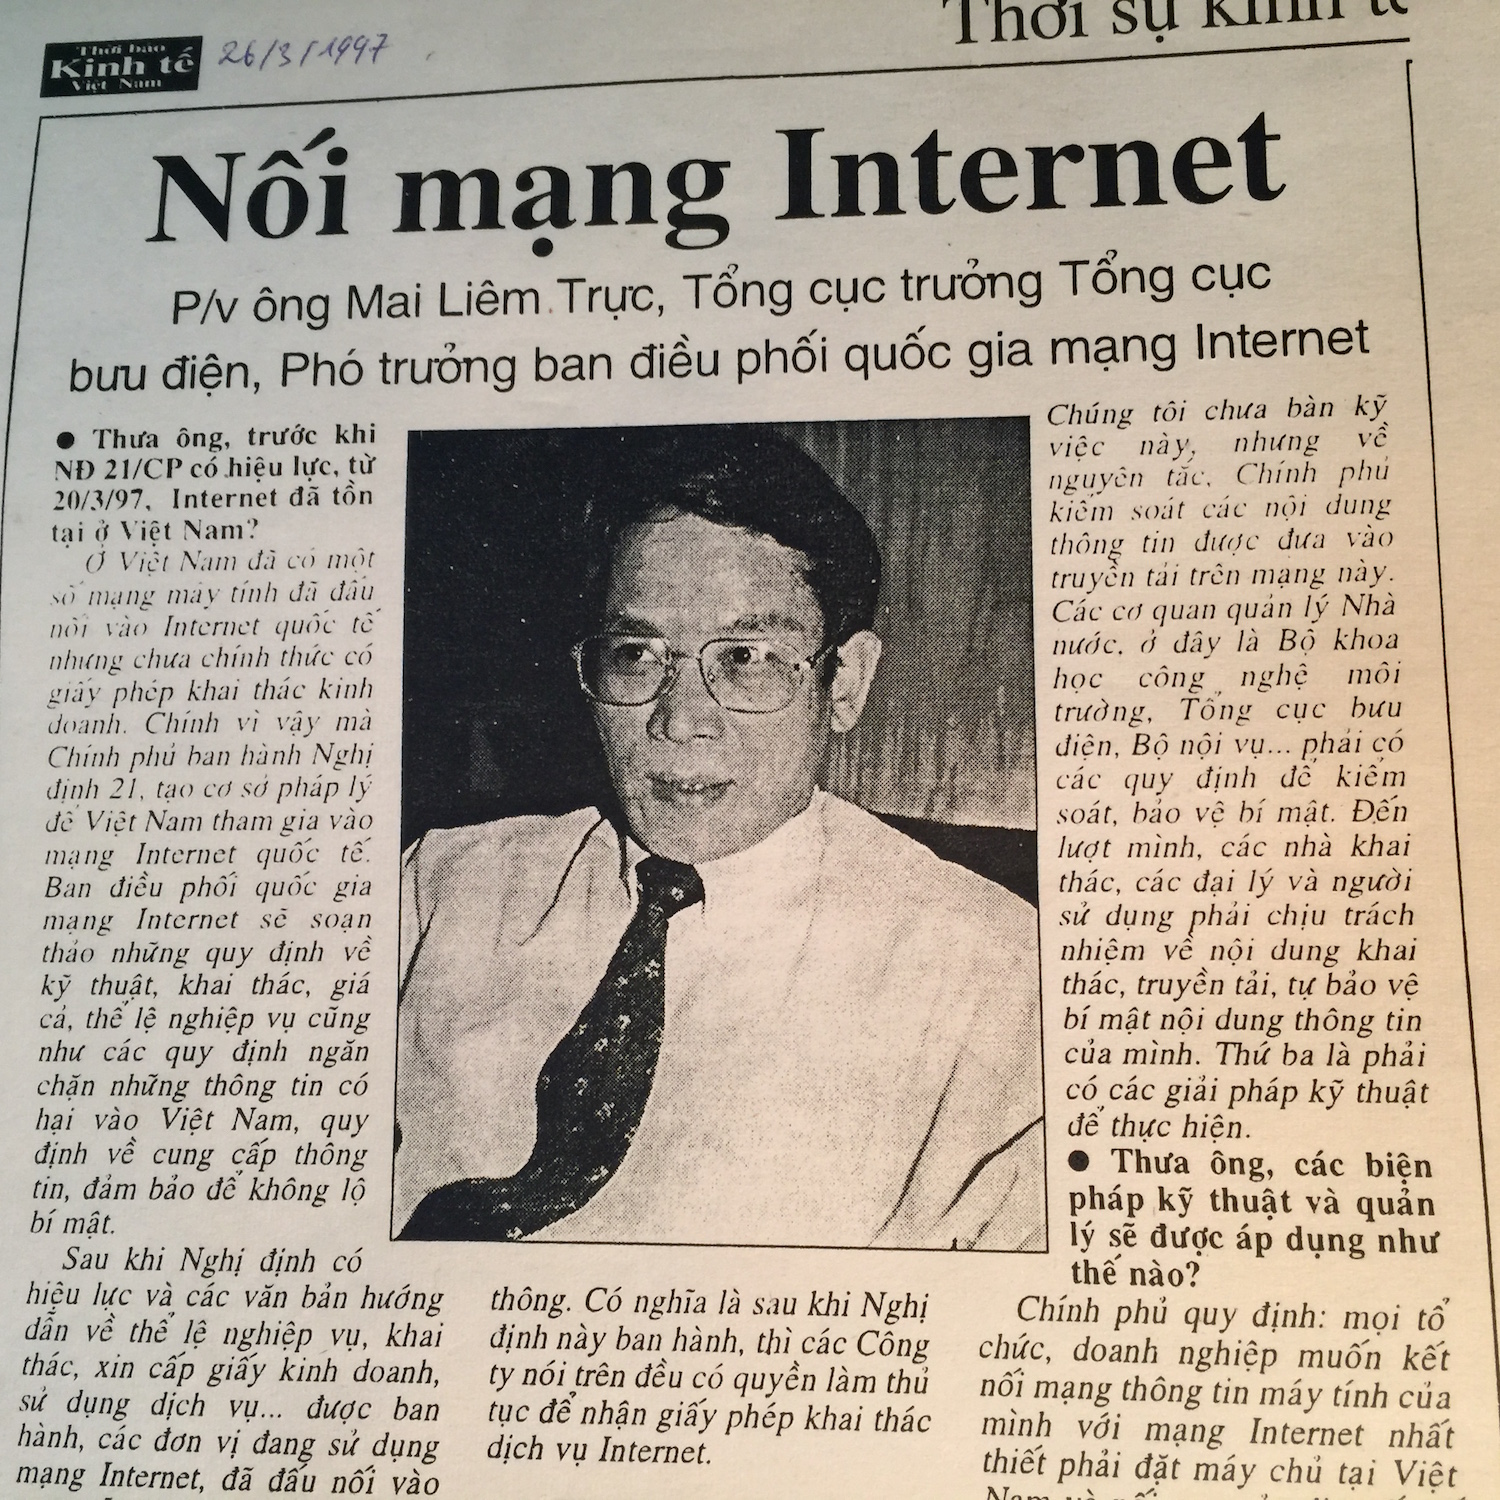 Dr Mai Liem Truc captured in this newspaper story from March 1997, eight months prior to his announcment that Viet Nam was ofocially connected to the Internet.